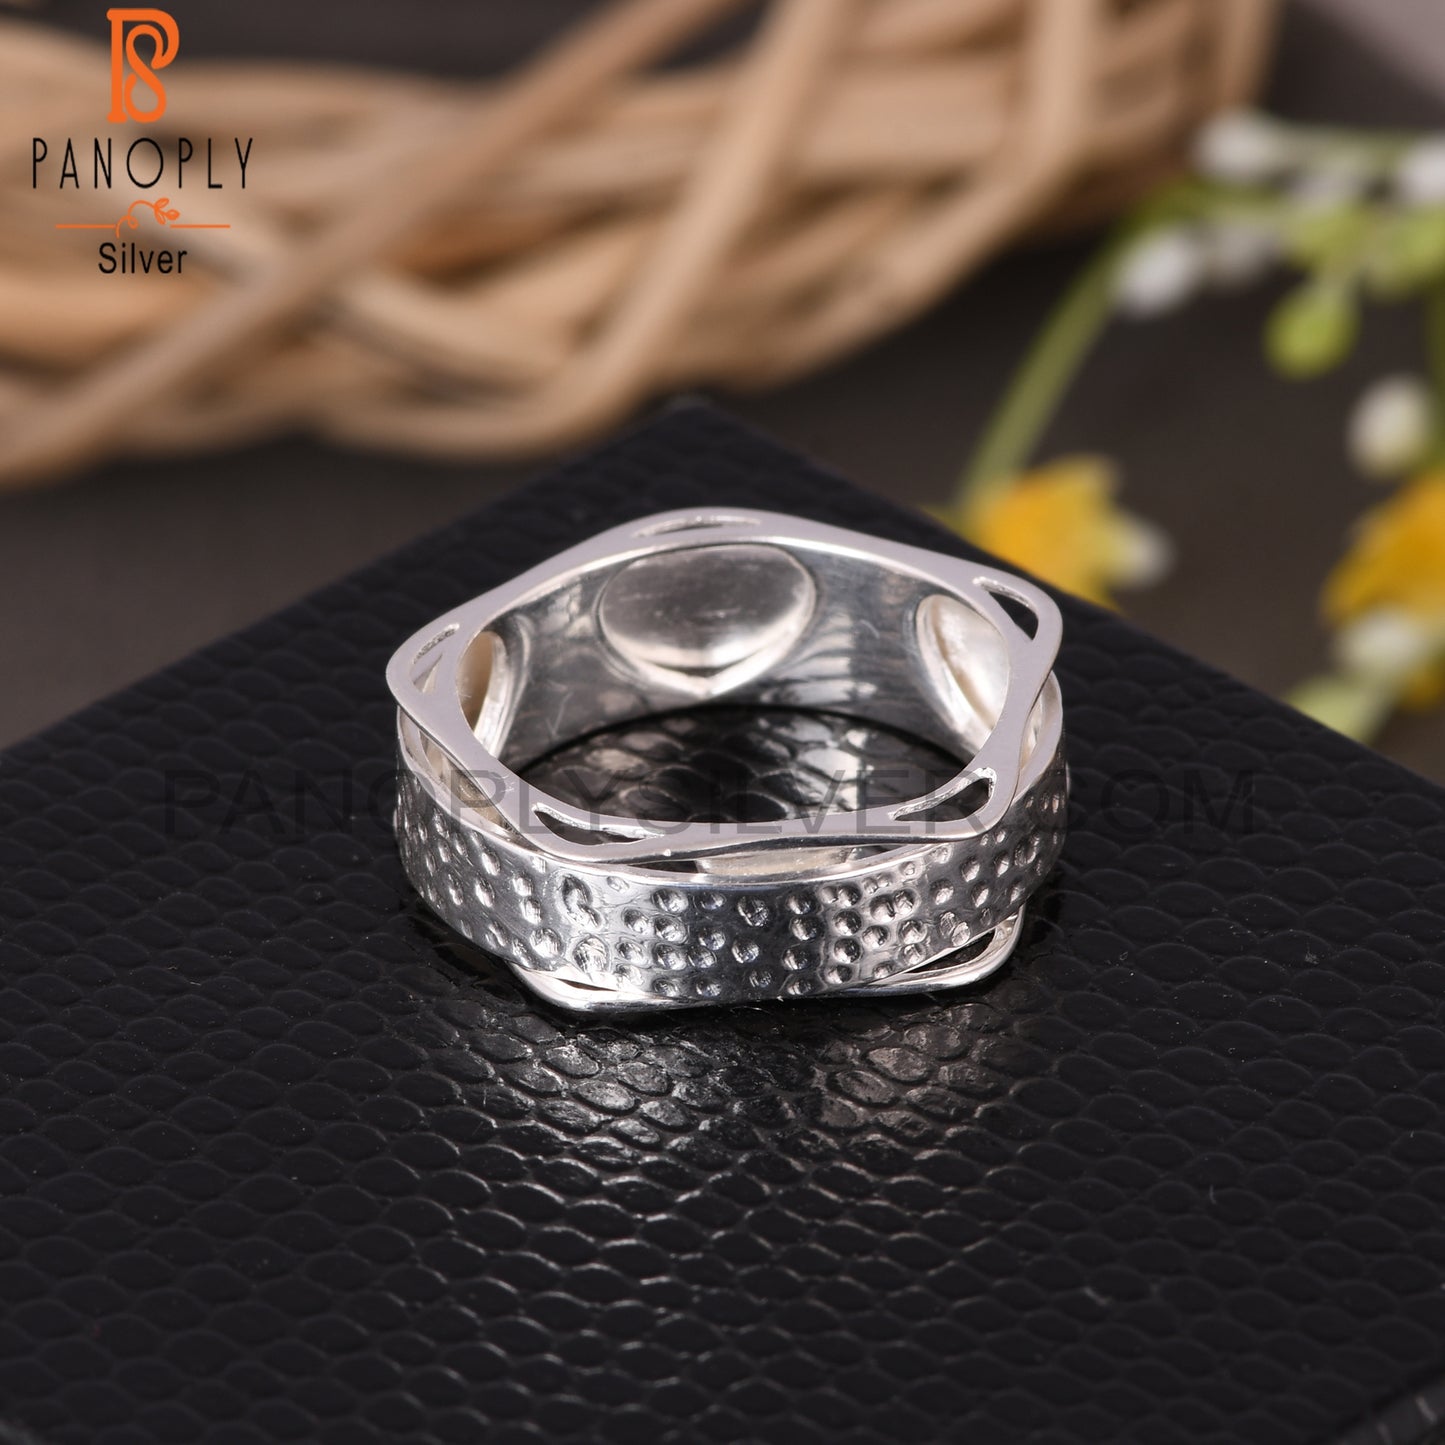 Handmade 925 Sterling Silver Wide Band Plain Ring